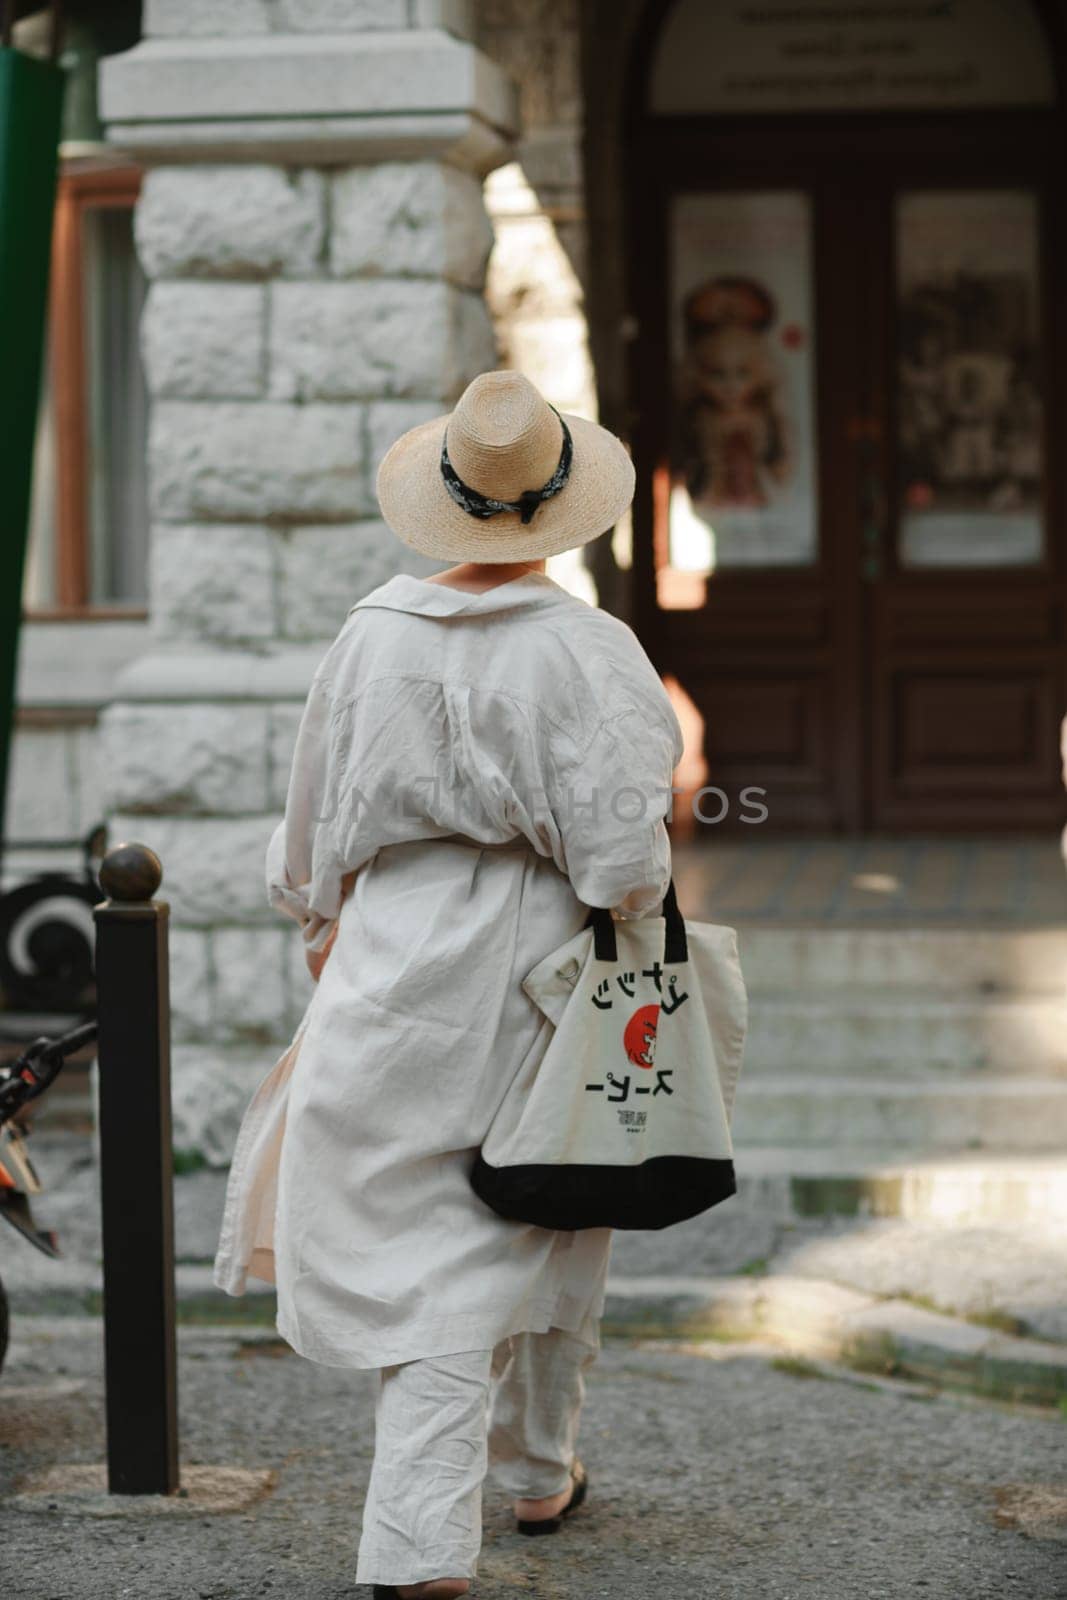 A woman in a hat in a white outfit with a bag walks around the Livadia Palace.